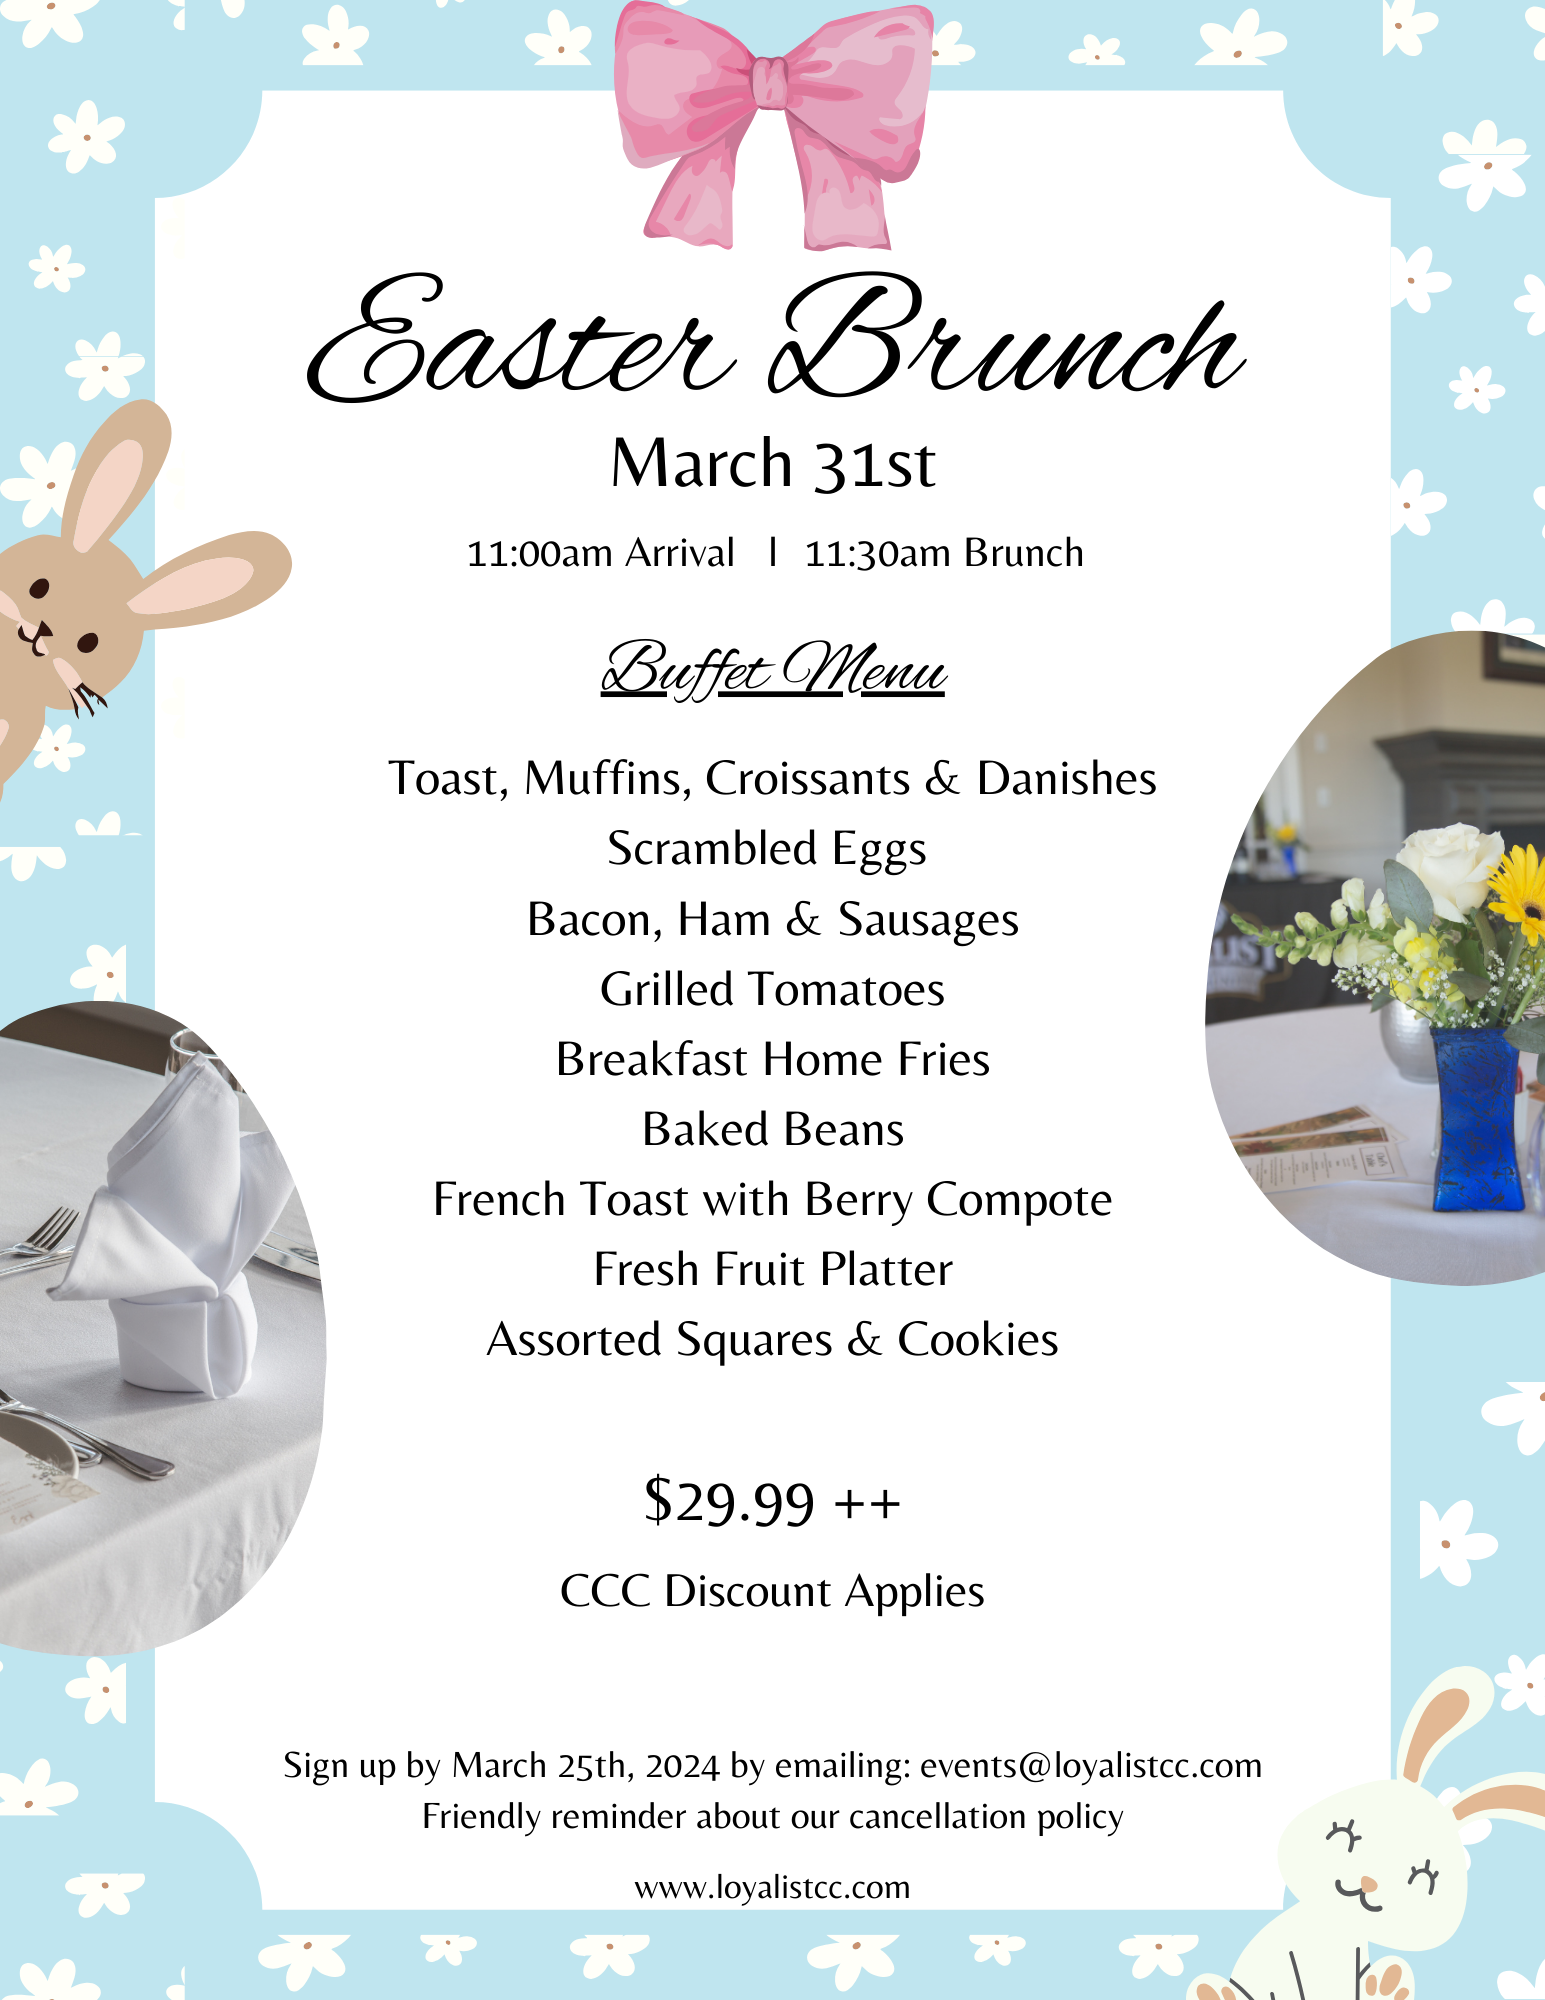 Loyalist Country Club is hosting an Easter Brunch on March 31st